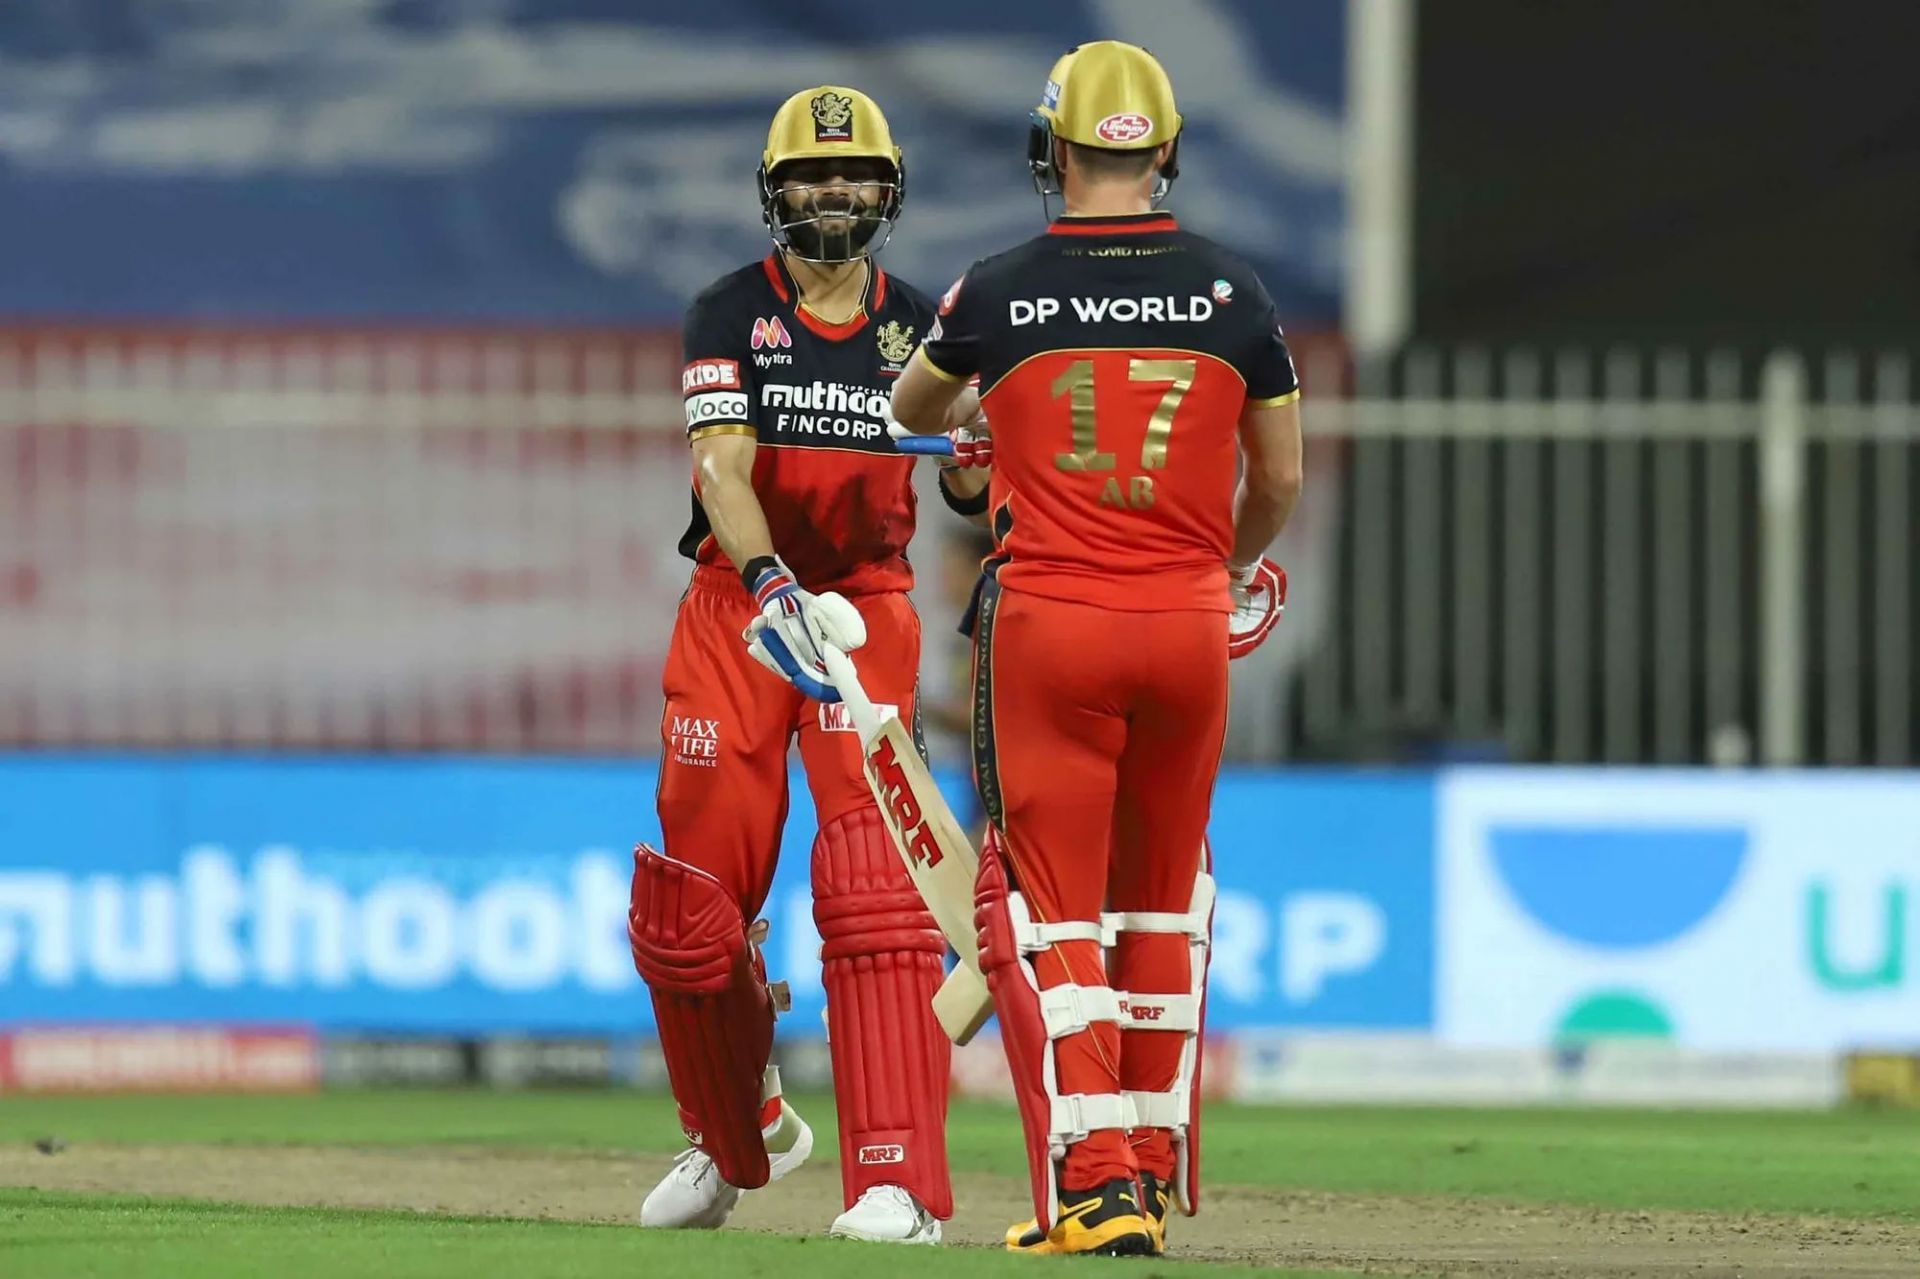 AB de Villiers with Virat Kohli - A decade of domination at RCB